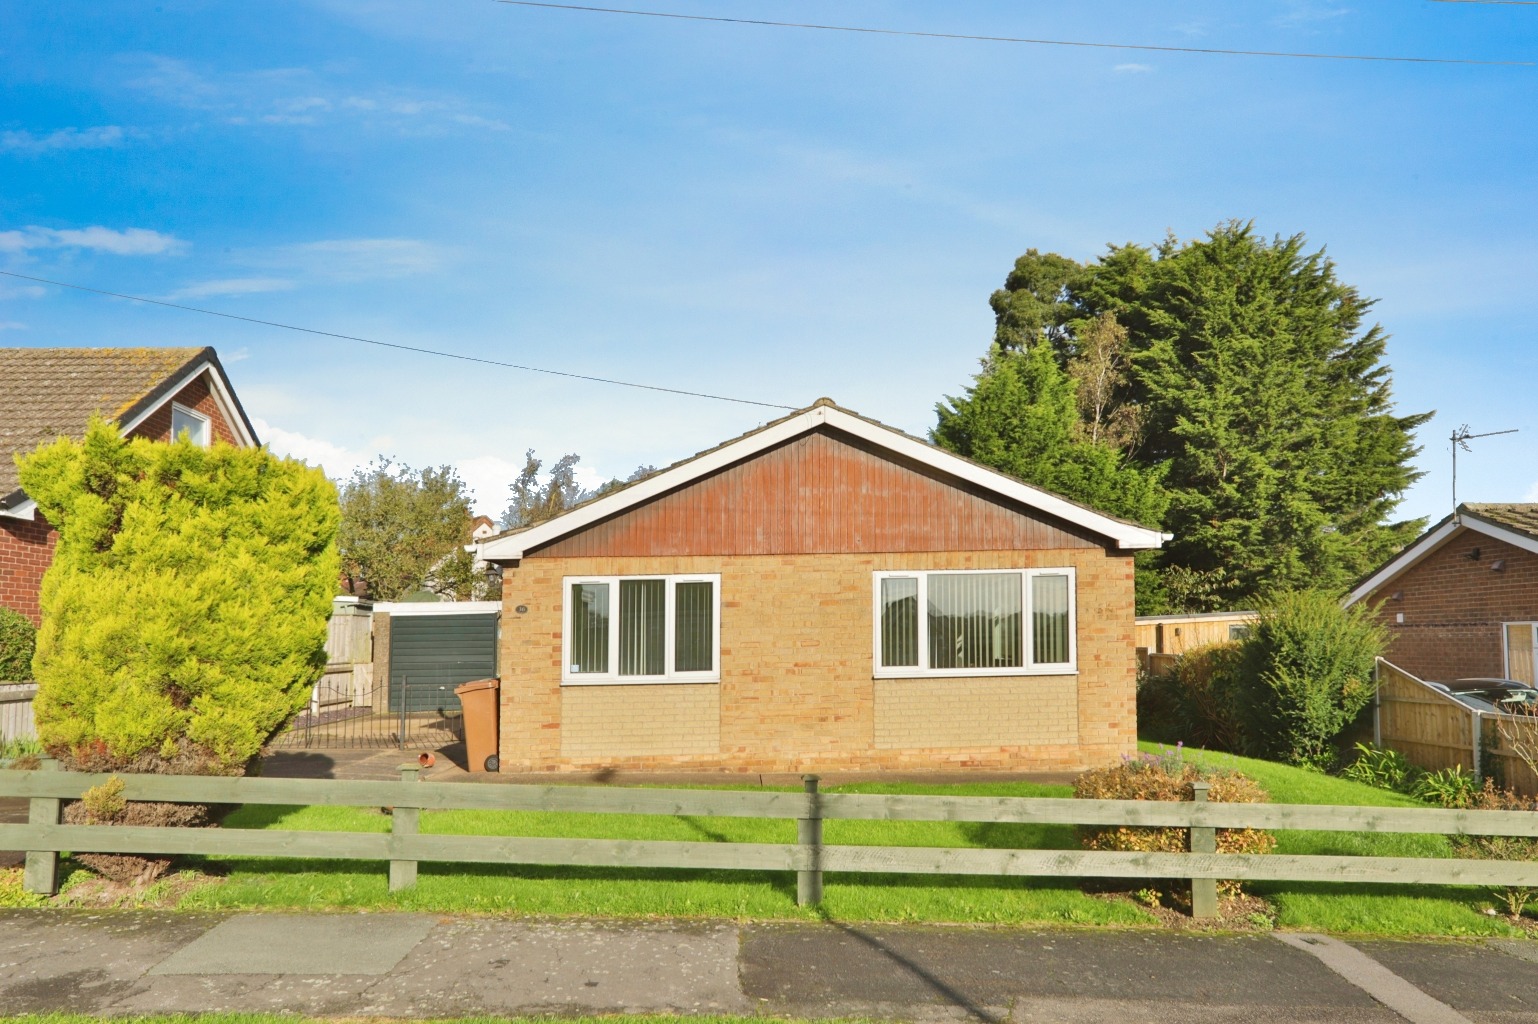 3 bed detached bungalow for sale in Warrendale, Barton upon Humber - Property Image 1